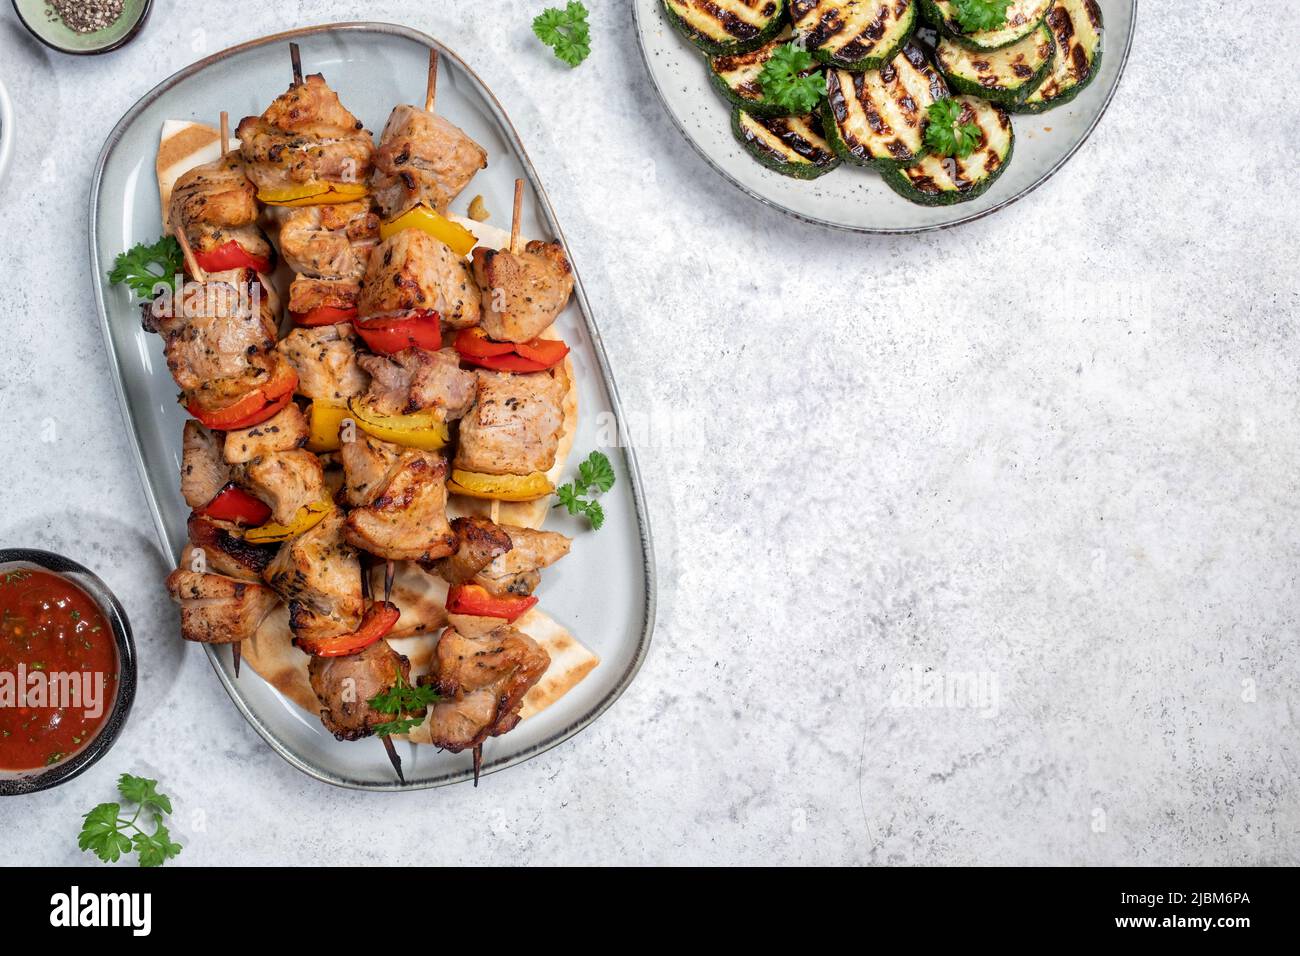 Grilled pork kebab with red and yellow pepper Stock Photo